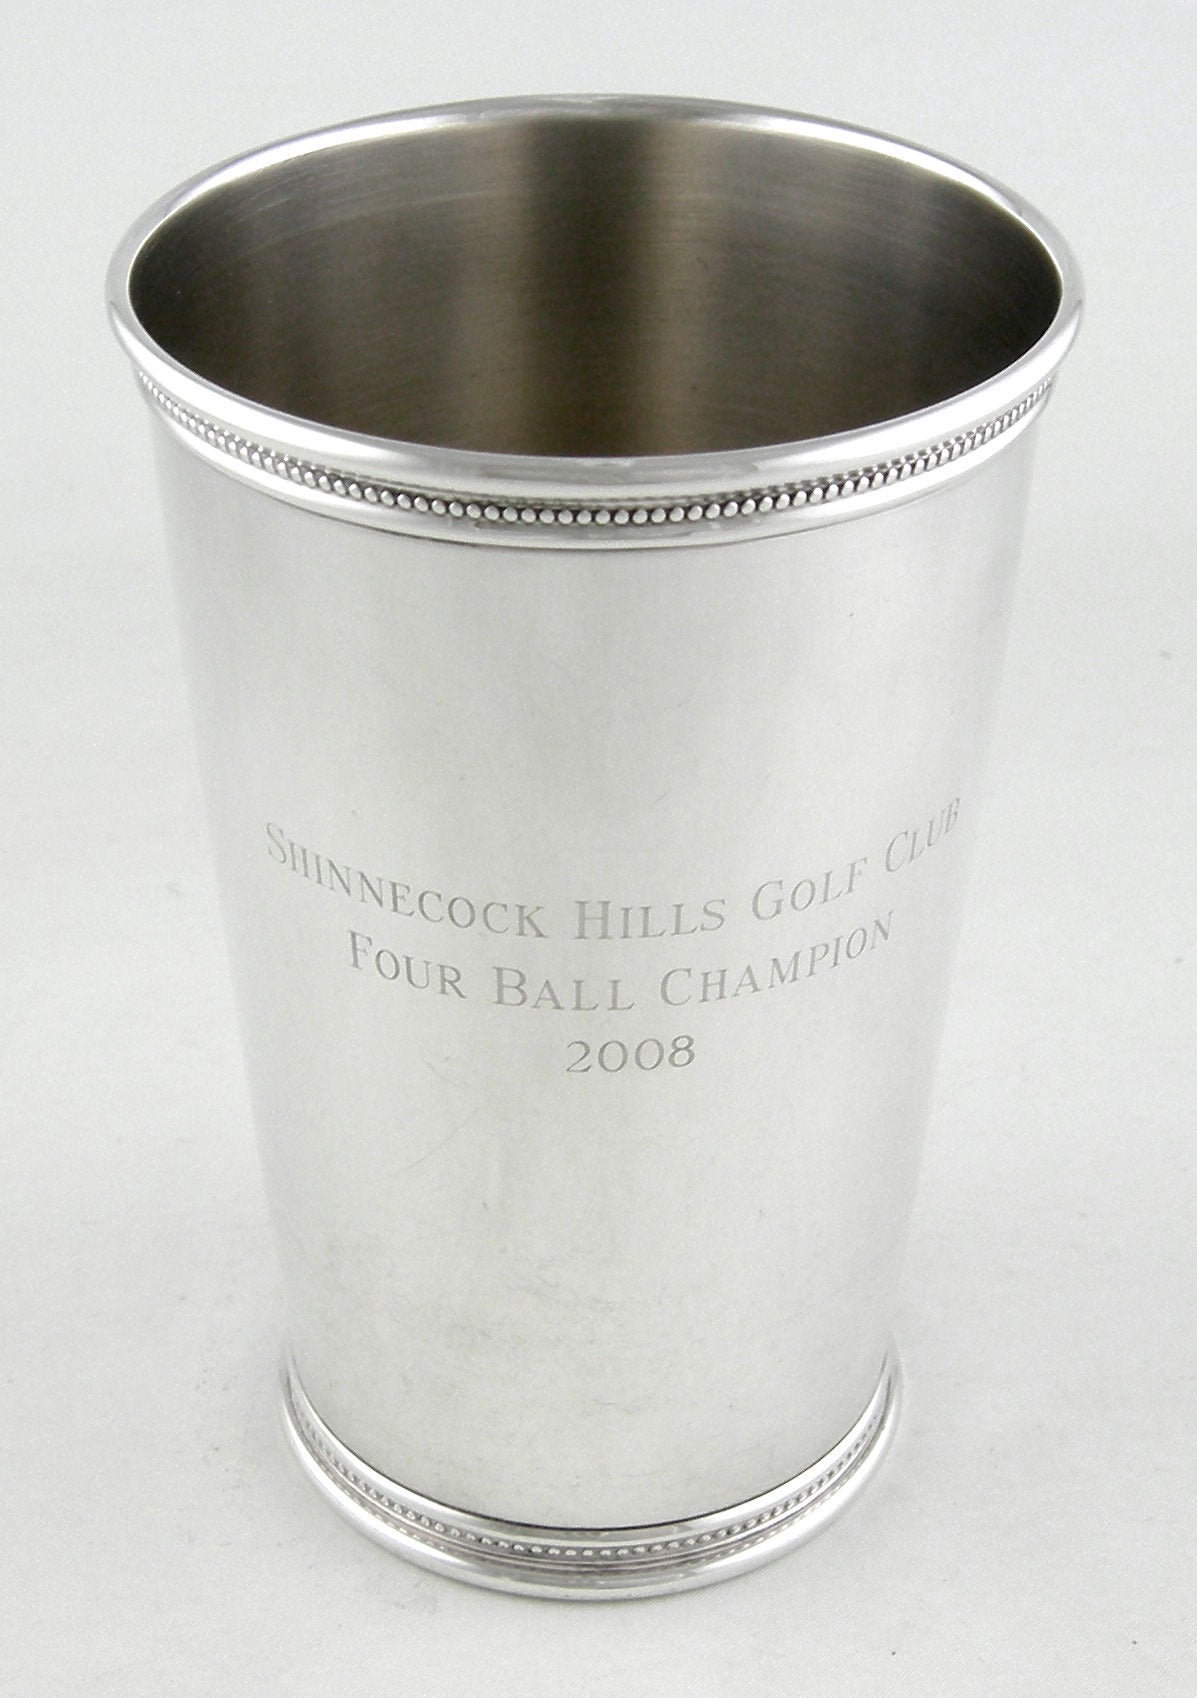 Tiffany & Co. Sterling julep/trophy cup.
Shinnecock Golf Club, long island.

The favorite site for the US open.